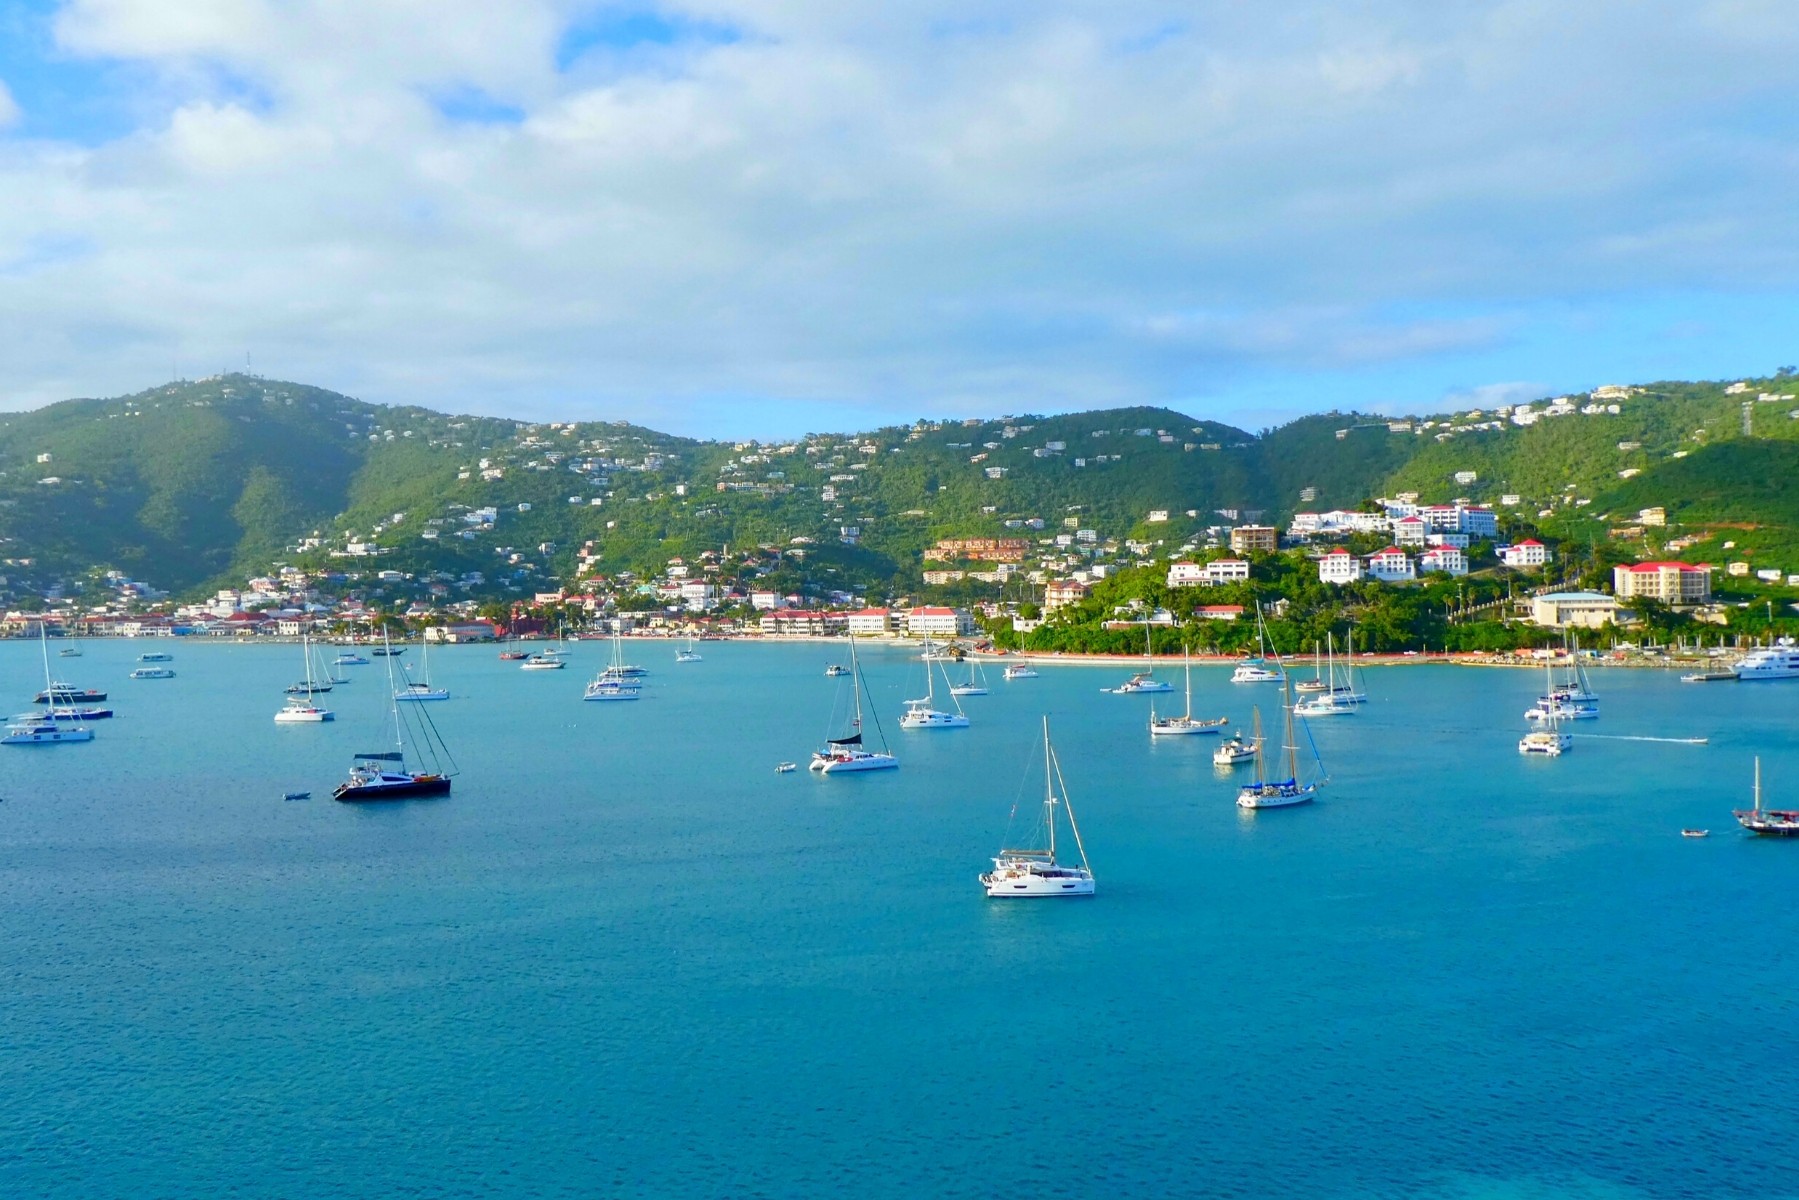 Yachts moored on blue waters of the USVI